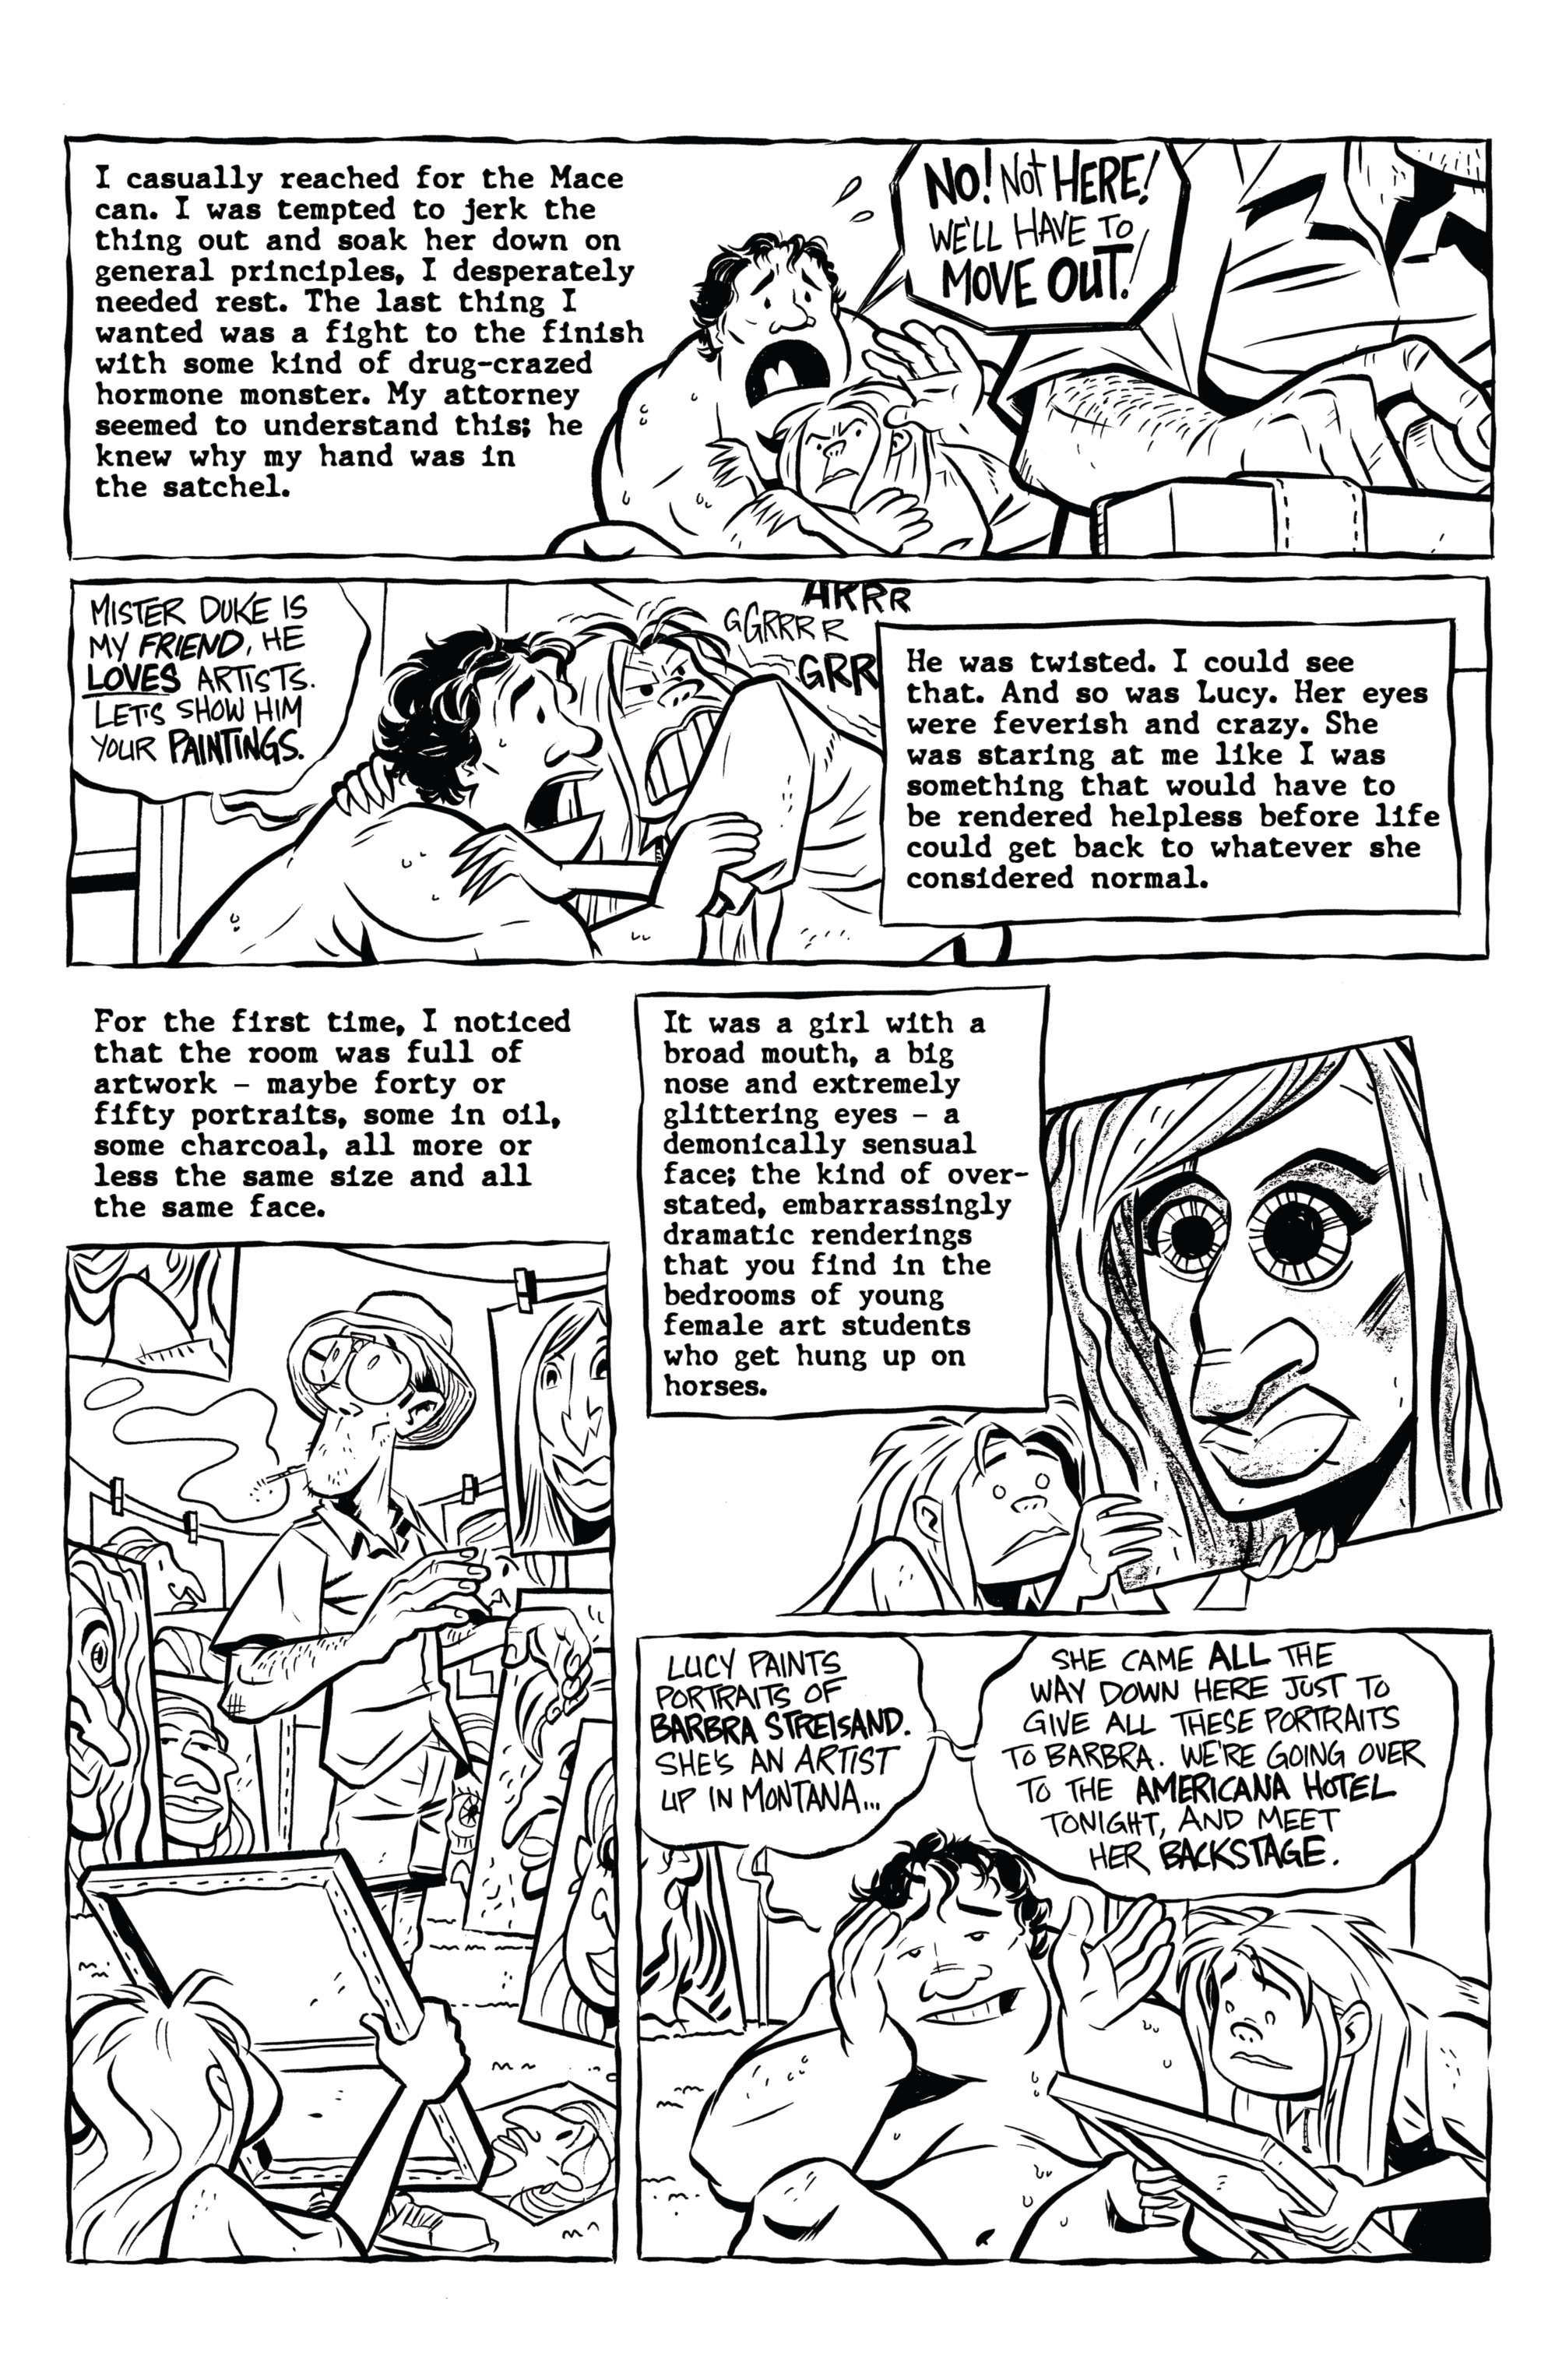 Read online Hunter S. Thompson's Fear and Loathing in Las Vegas comic -  Issue #3 - 22